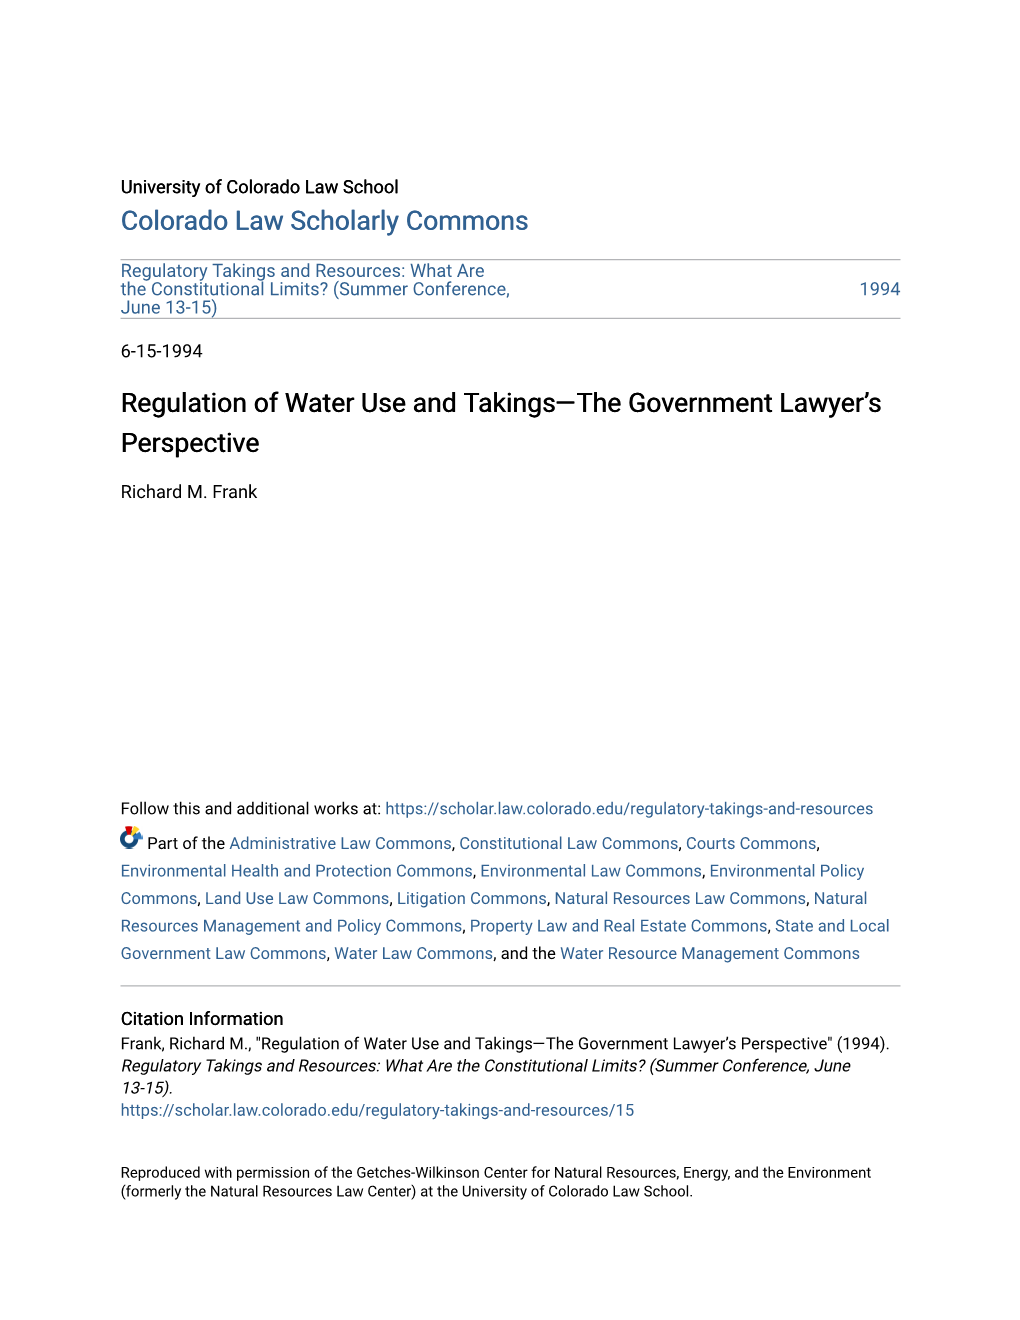 Regulation of Water Use and Takings—The Government Lawyer's